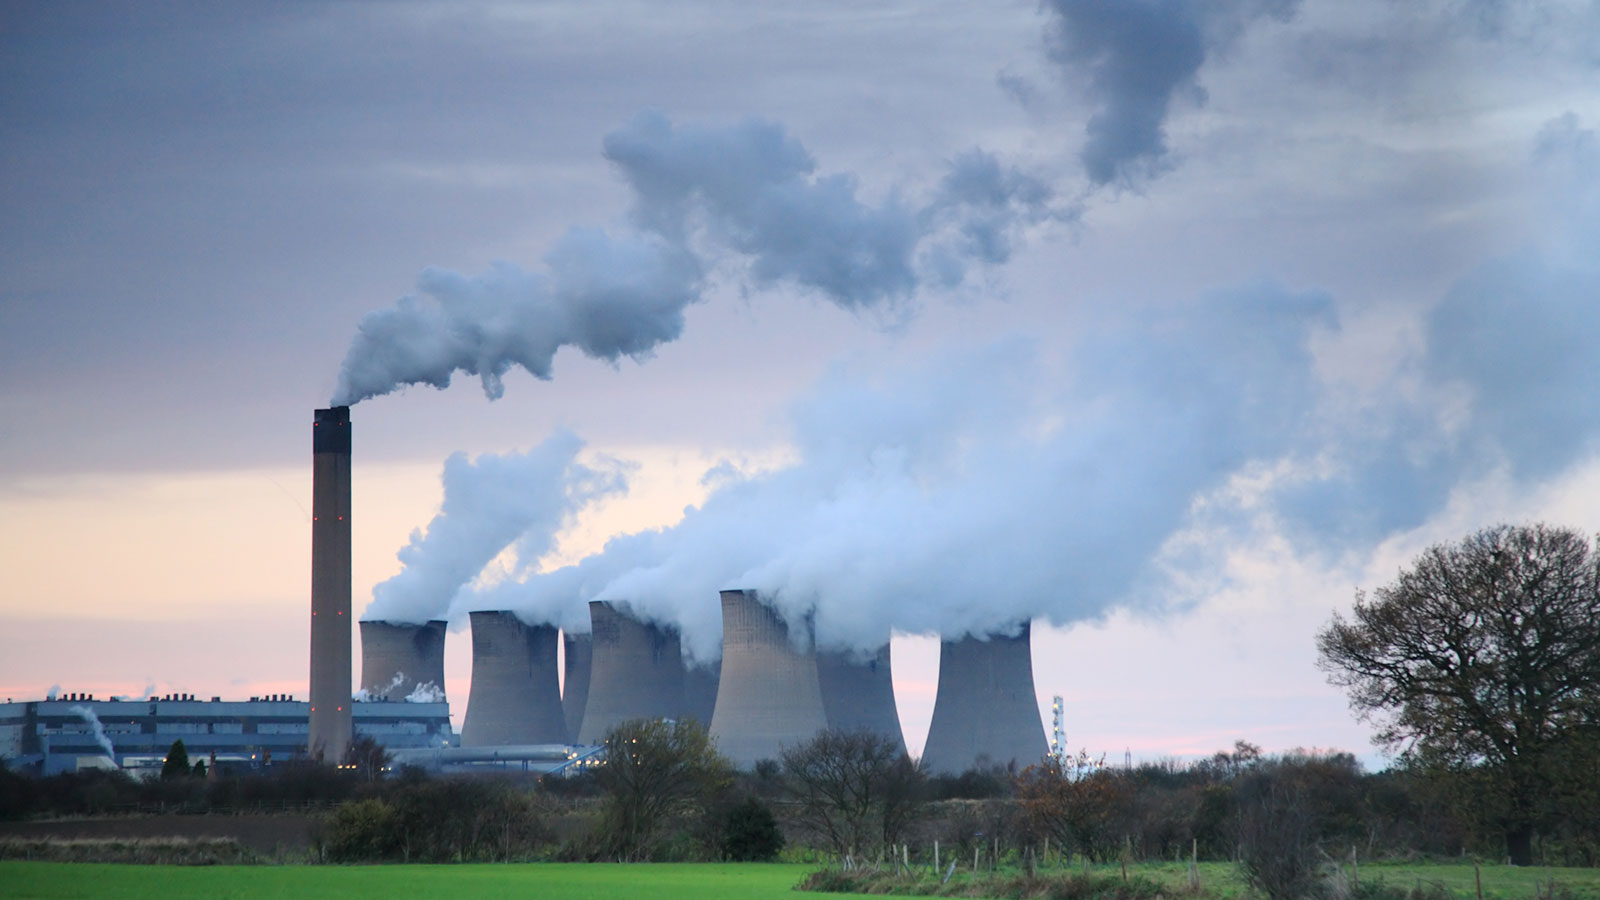 A new report from Public First, commissioned by Drax Group, has uncovered a looming energy security challenge for the UK by 2028. 